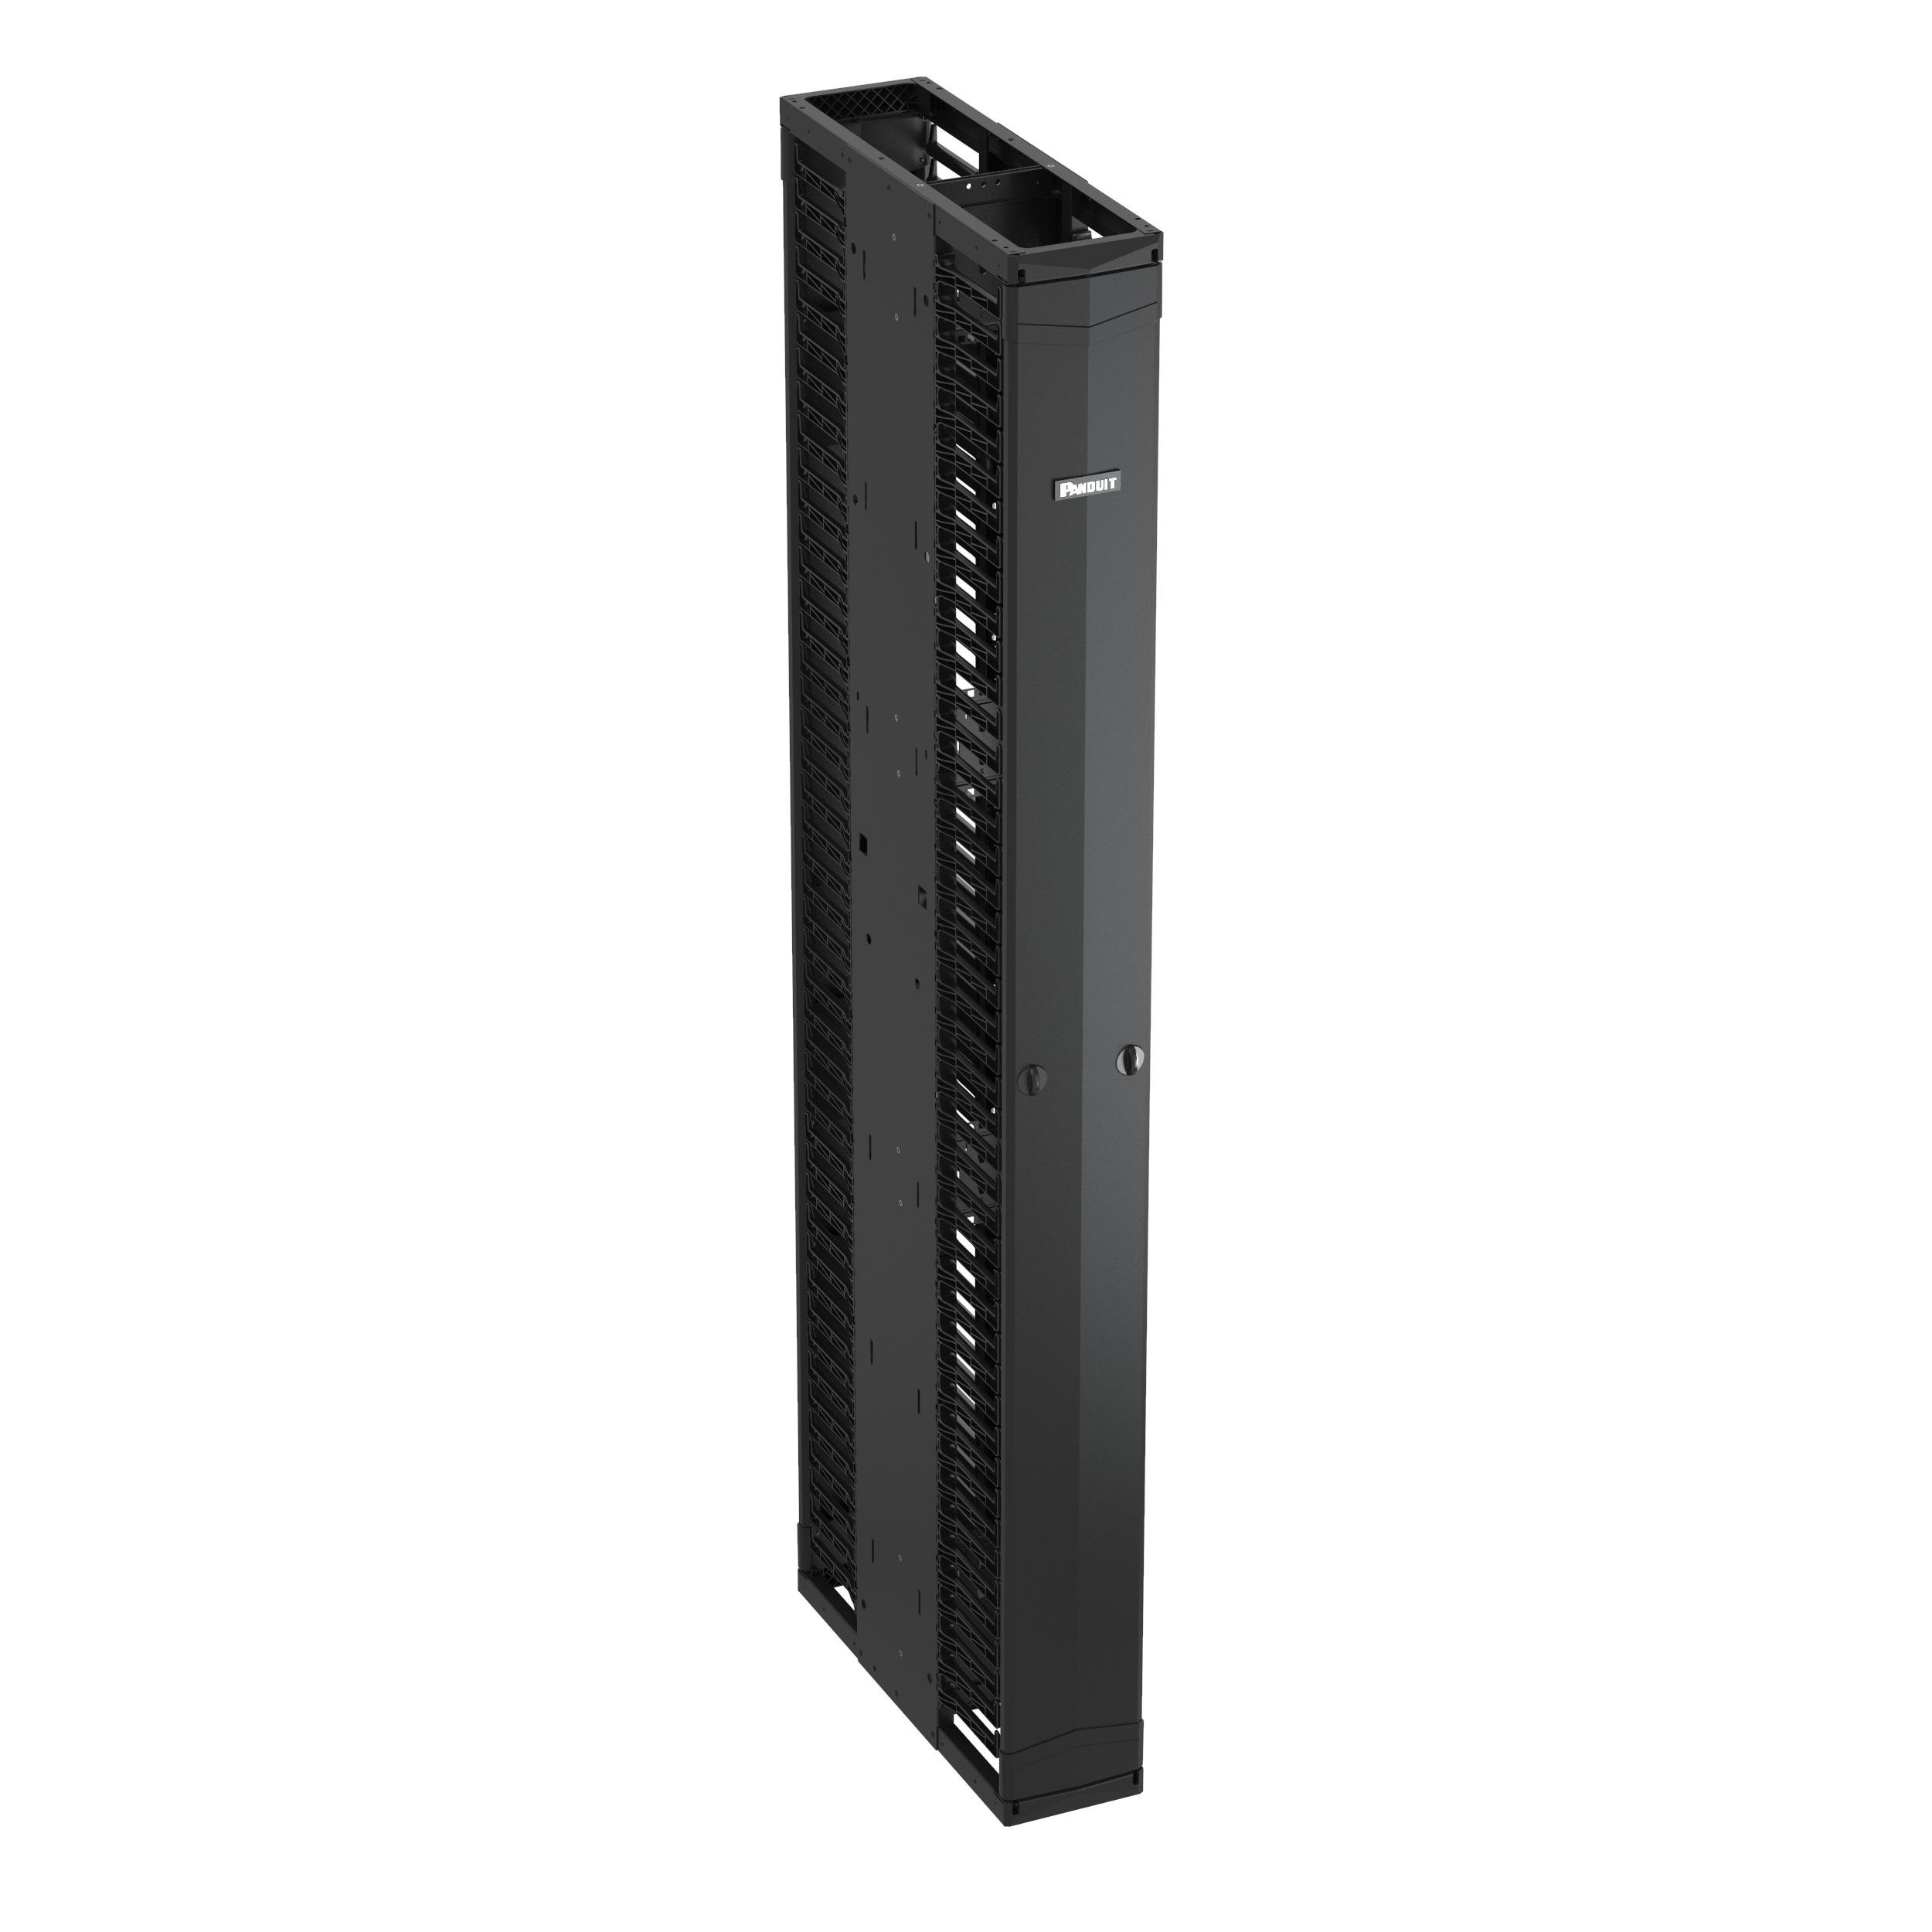 Panduit PE2VD08 PatchRunner™ 2 Enhanced Vertical Cable Manager, BL